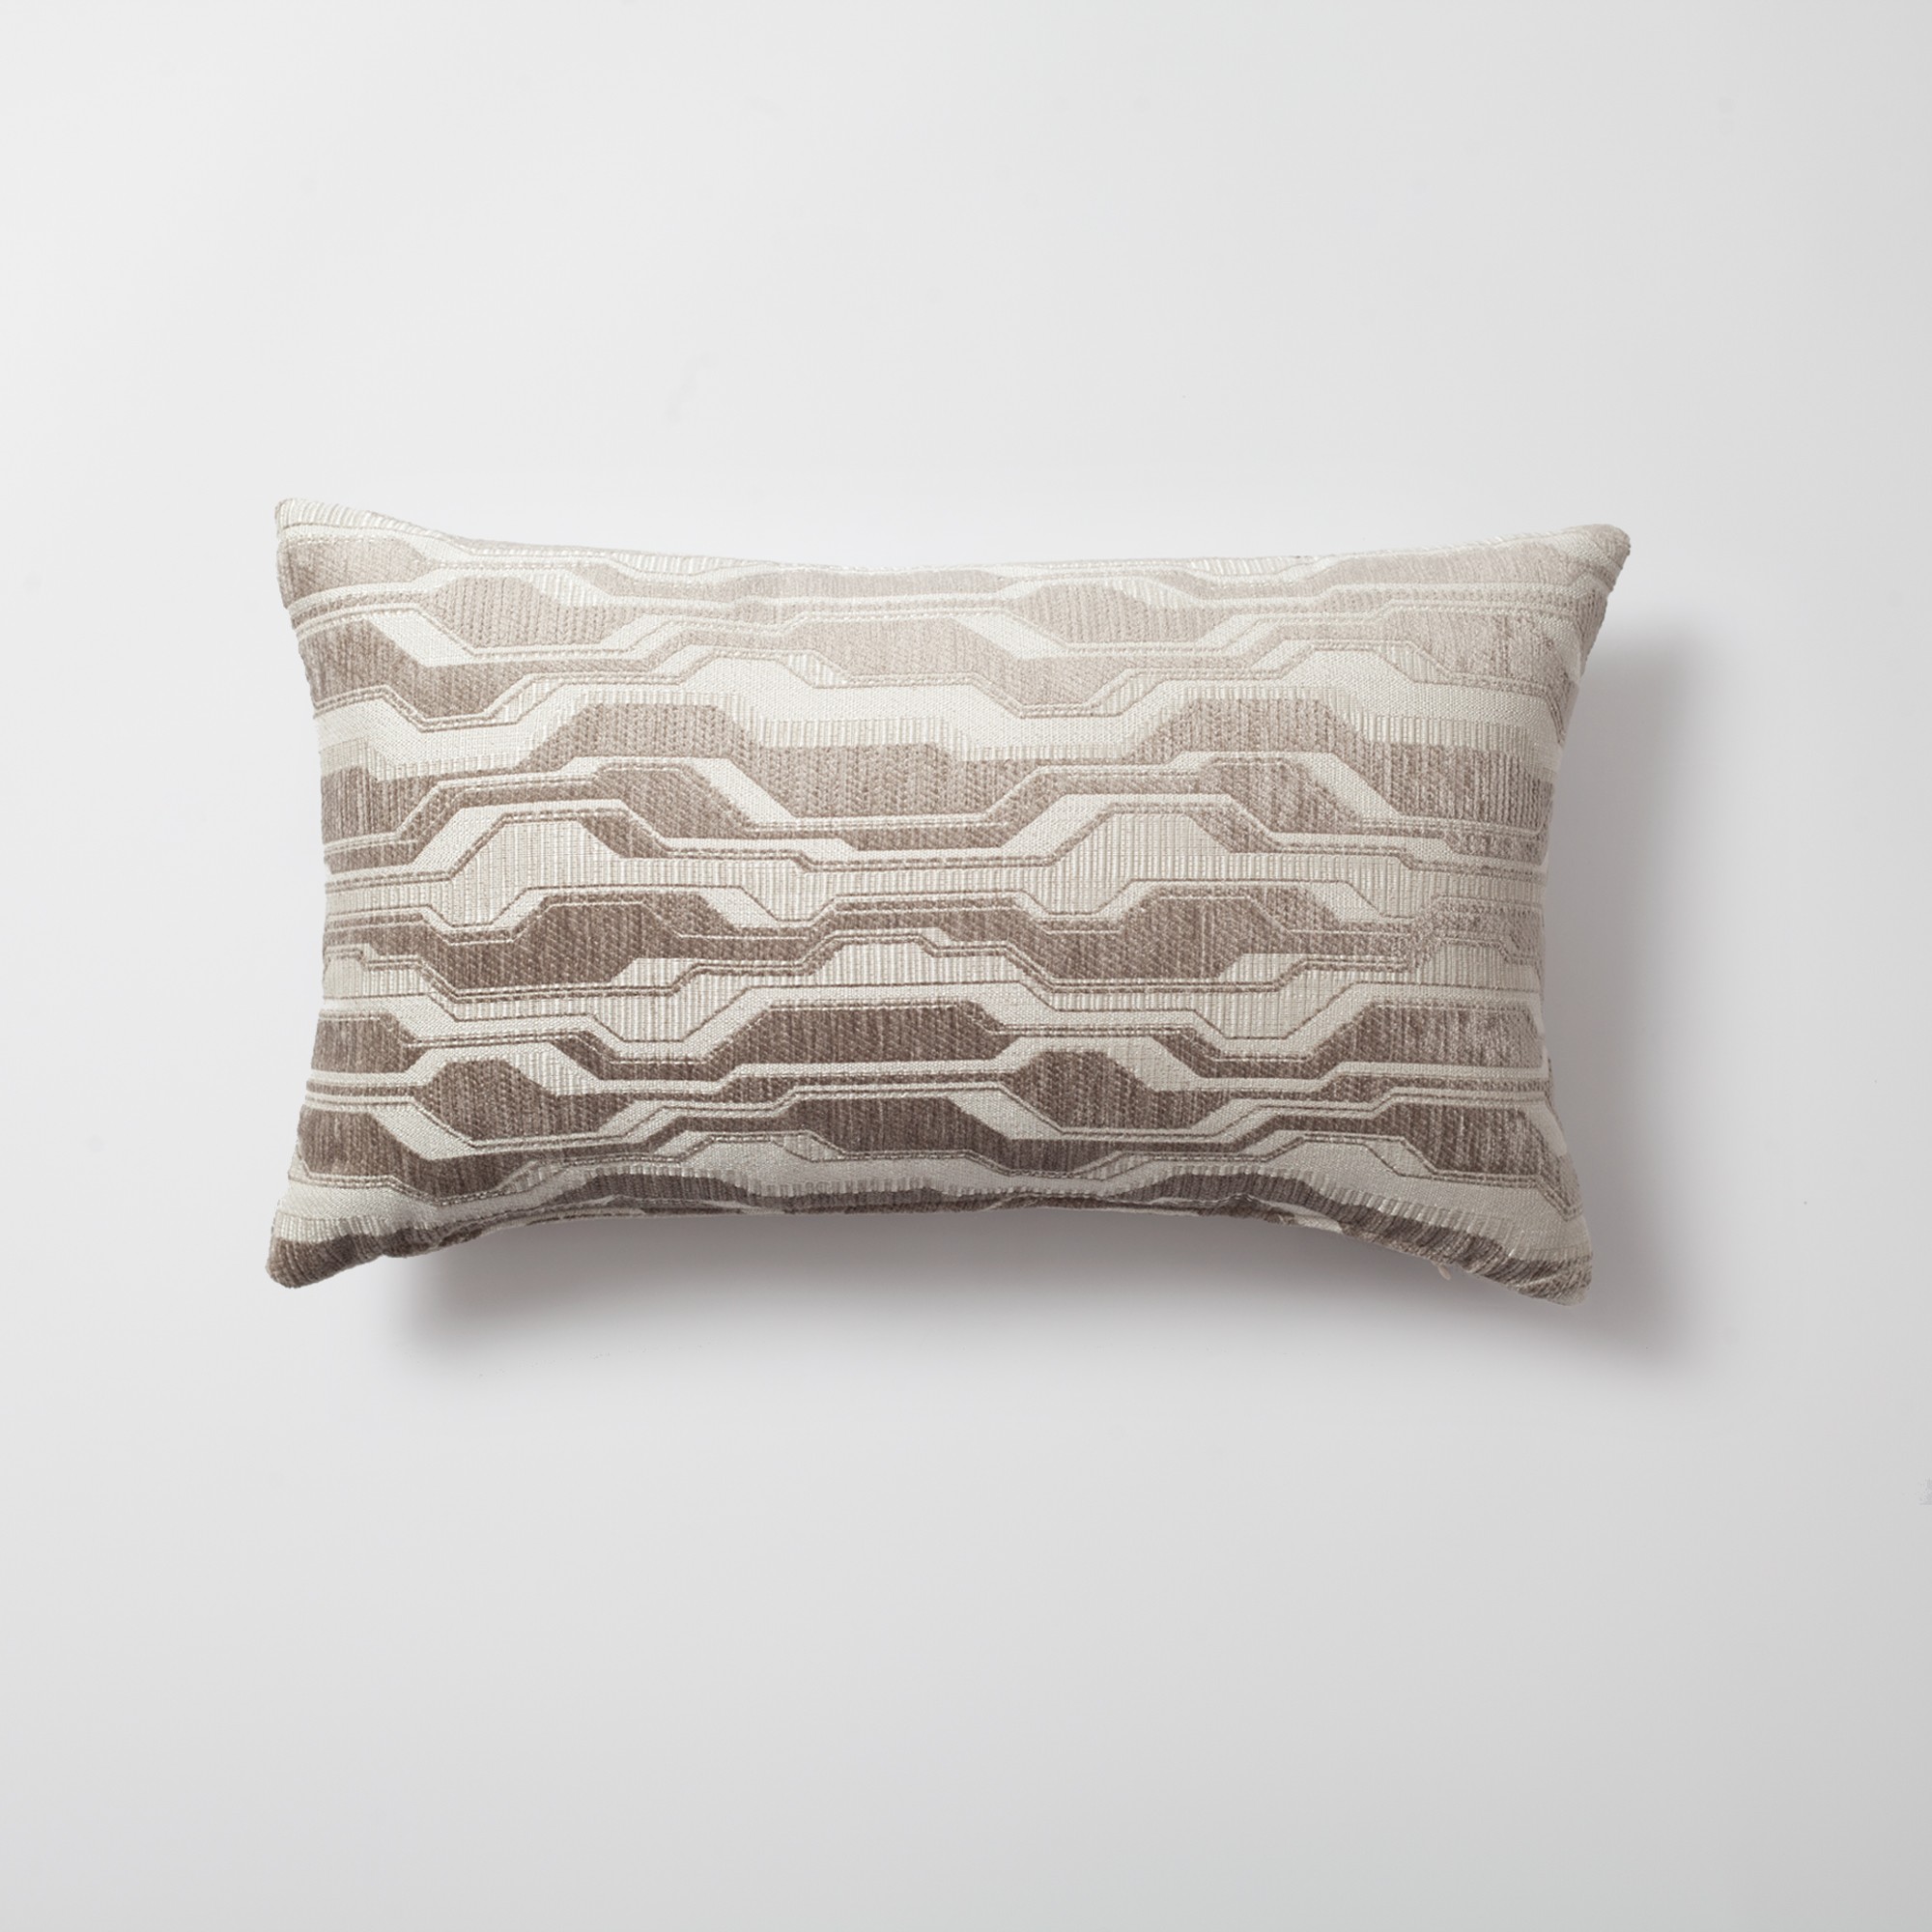 "Lebon" - Geometric Patterned 12x20 Inch Pillow - Mink (Cover Only)